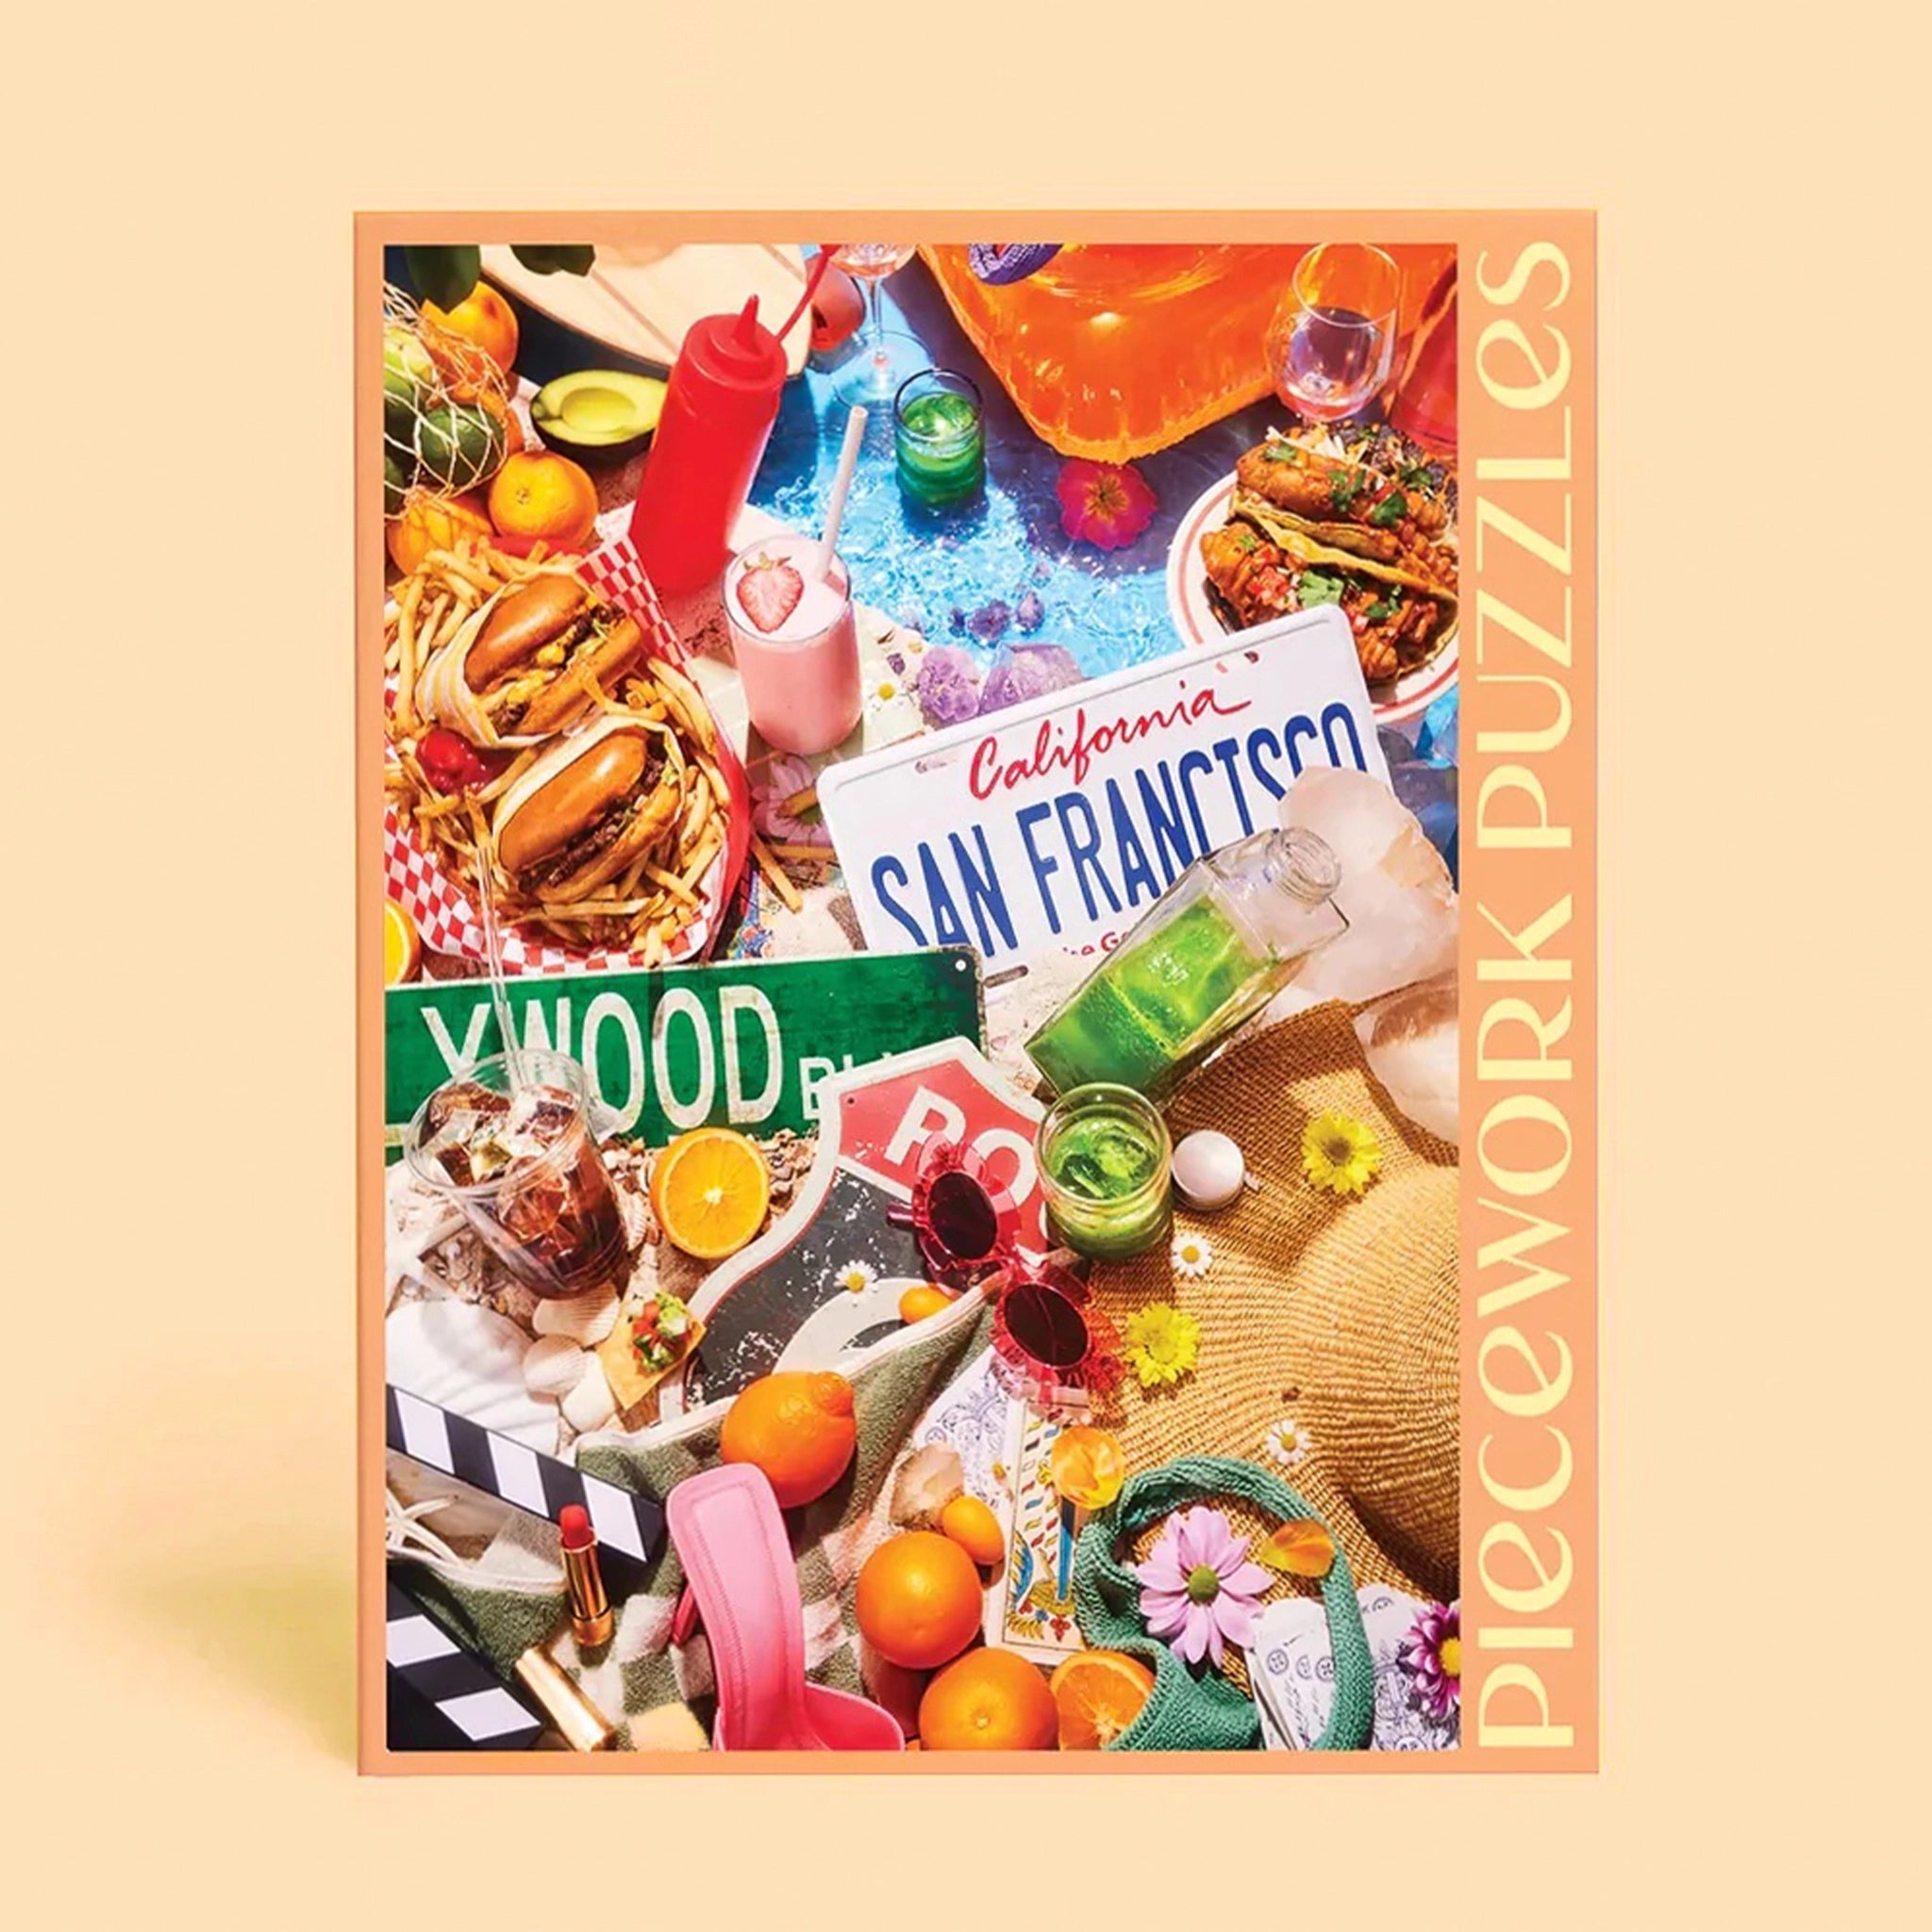 On a light orange background is a puzzle box that has images of the iconic state of California including, green juices, sunglasses, animal style burgers and fries, tacos, a Hollywood street sign and more.